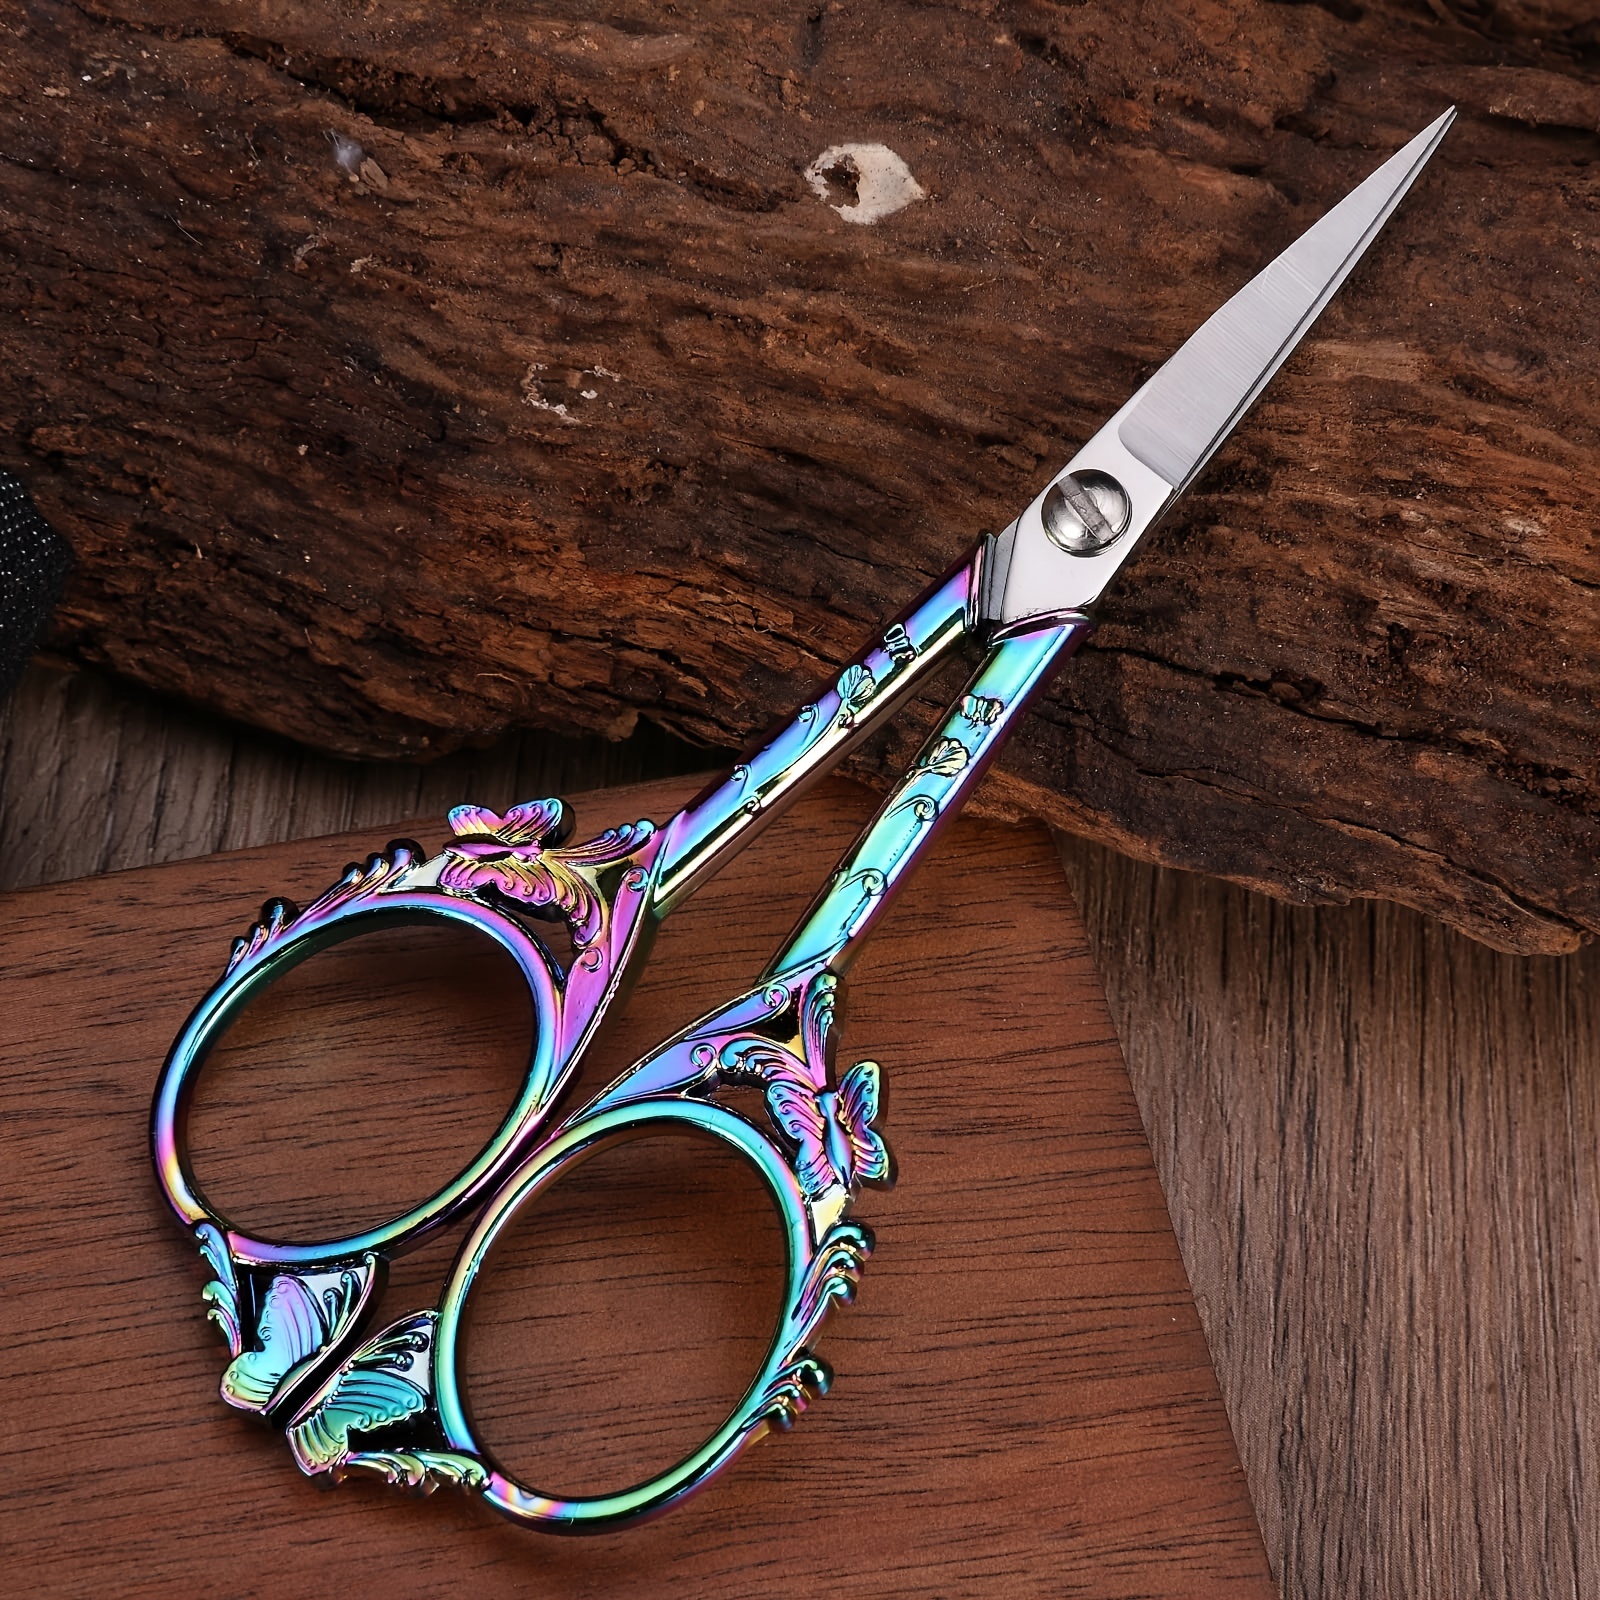 Small Embroidery Scissors Sewing Scissors, Thread Snips, Small